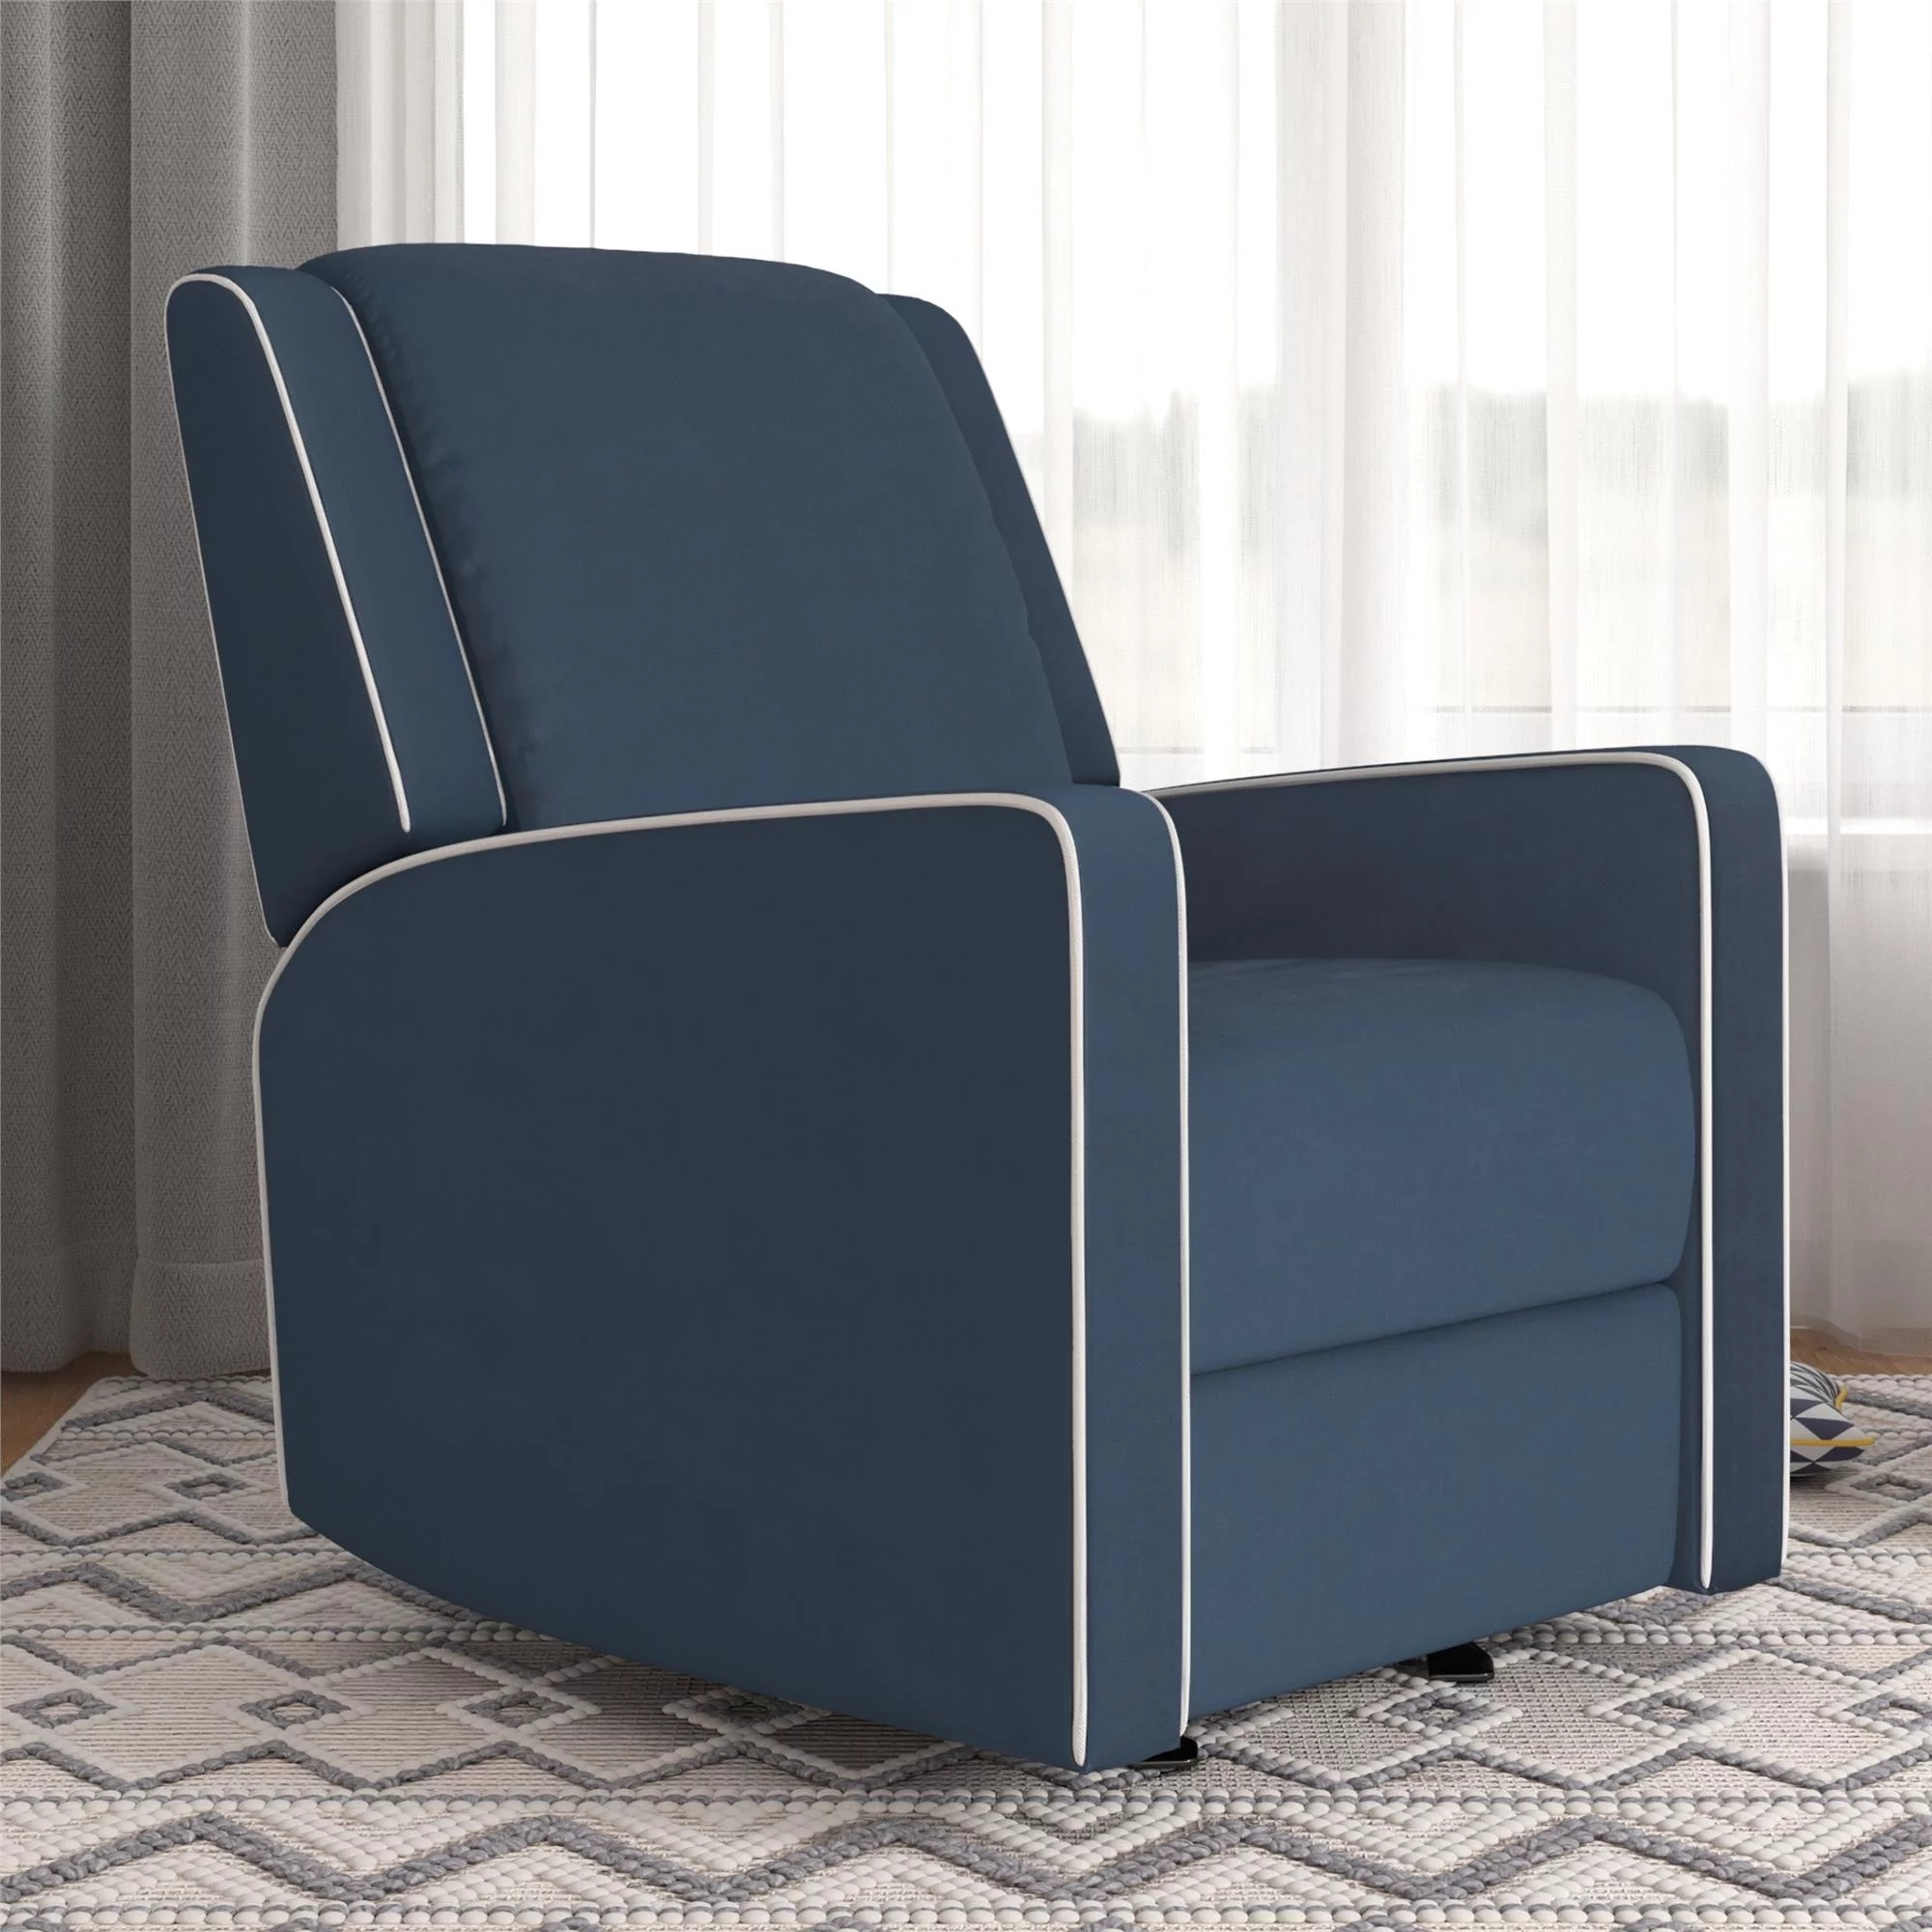 Baby Relax Robyn Rocker Recliner Chair with Pocket Coil Seating, Navy Linen